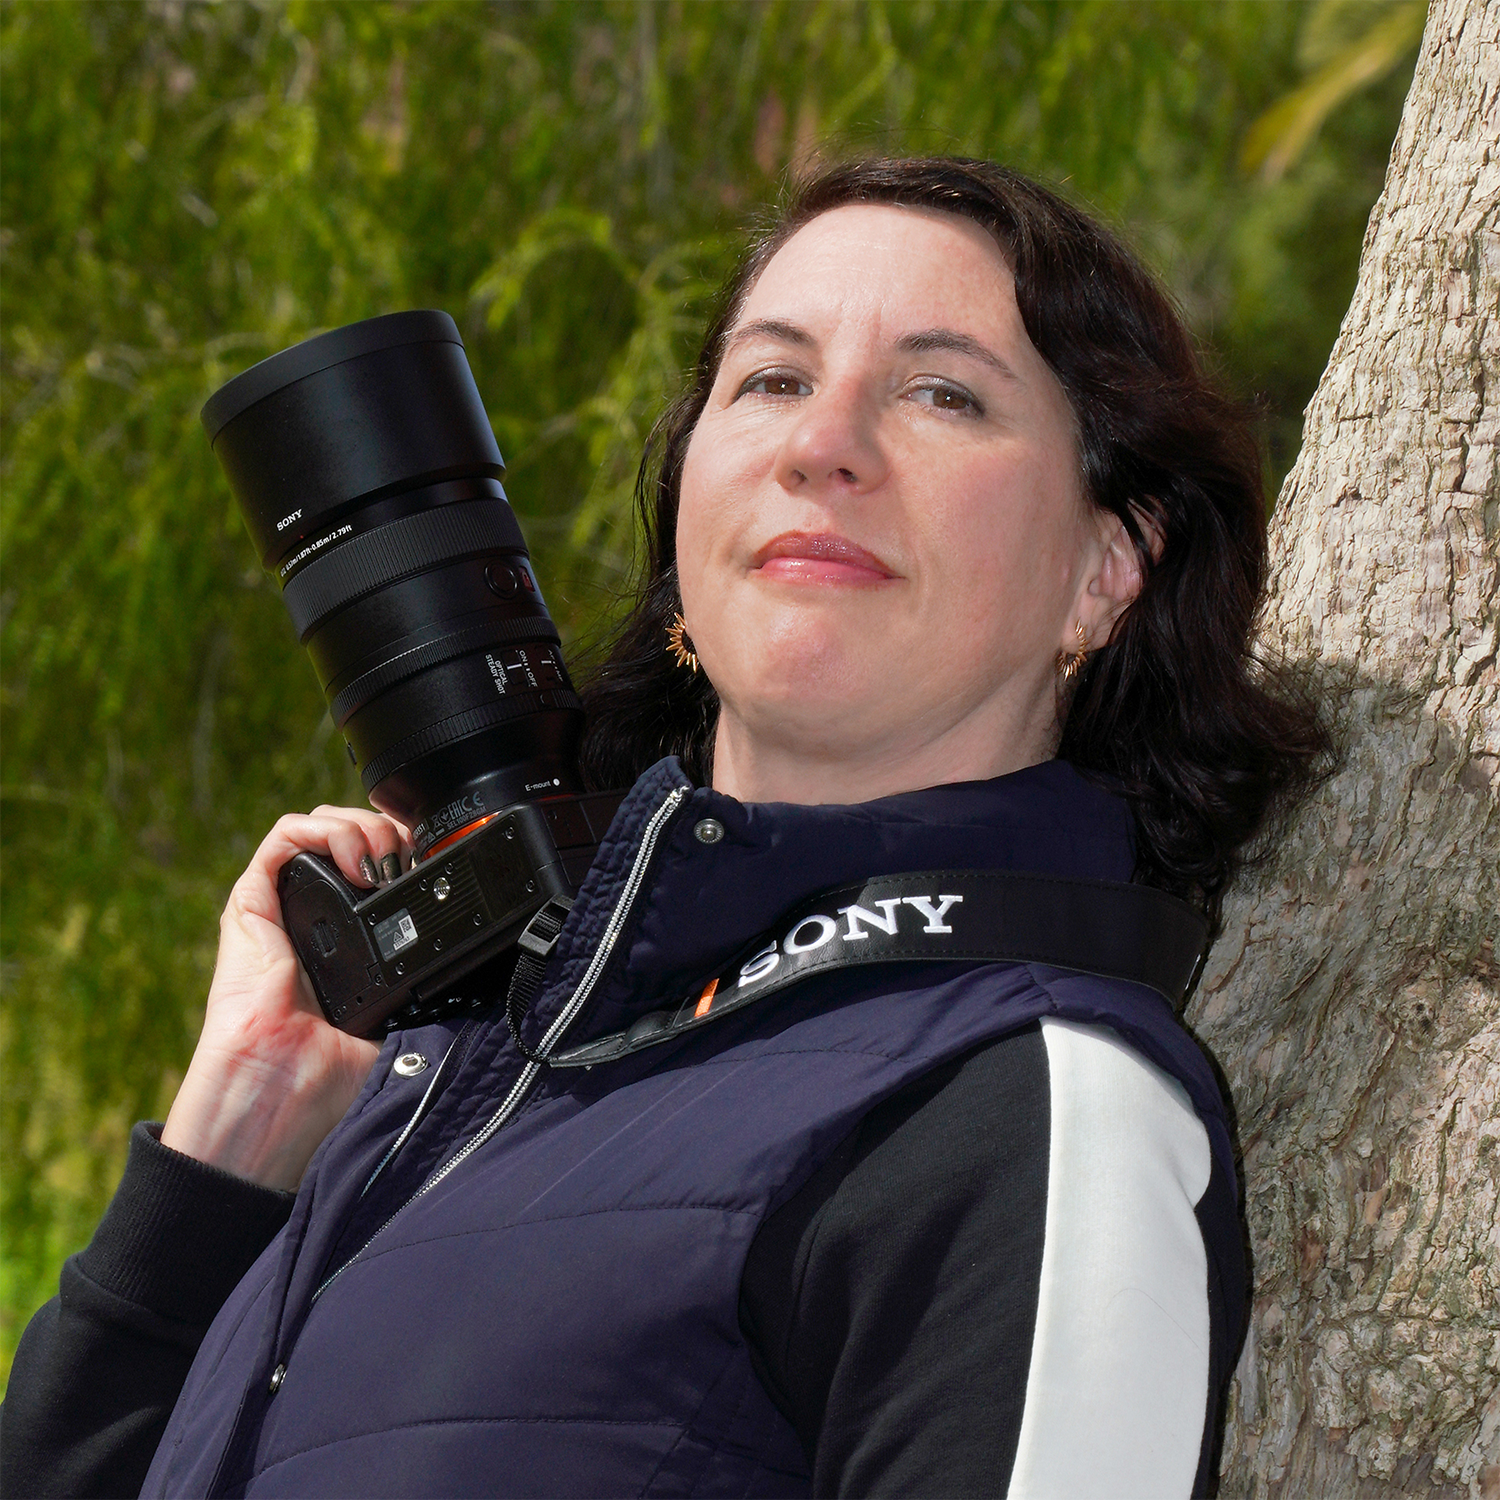 Photograph of Photographer Amy Tierney holding a camera